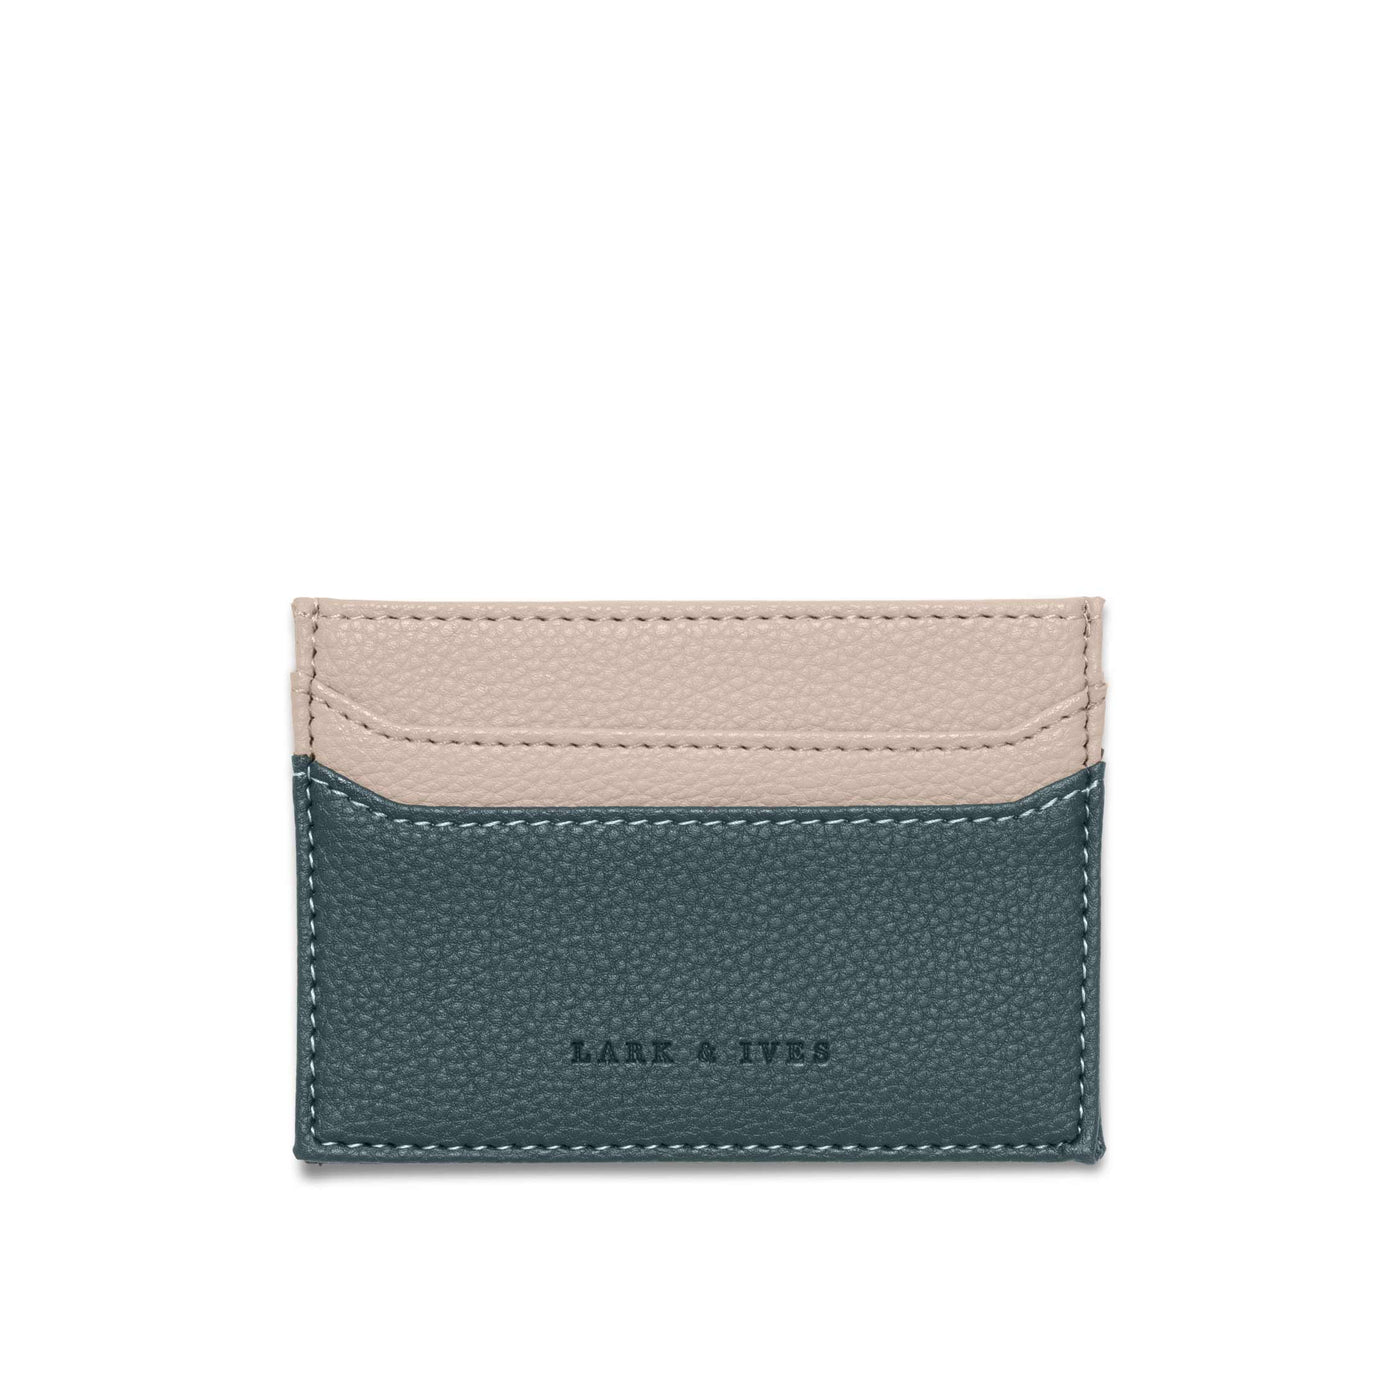 Lark and Ives / Vegan Leather Accessories / Small Accessories / Wallet / Mini Wallet / Card Case / Card Holder / Flat Card Case / Nude Beige and Dark Green